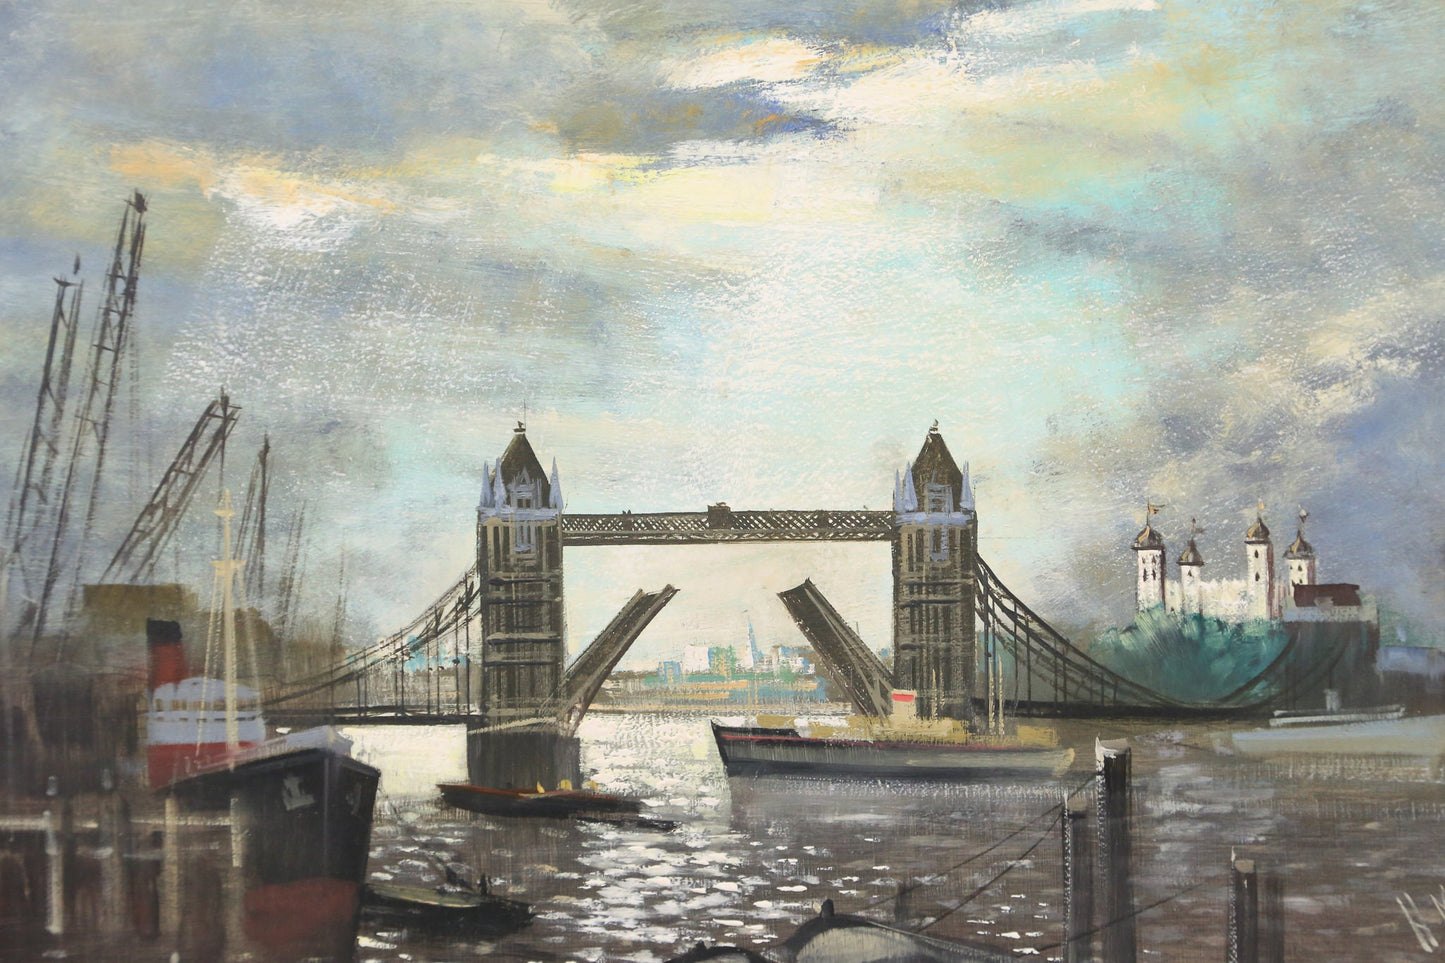 Oil Painting London England Cityscape Tower of London Bridge Harbor River Thames Signed H. Moss 1950s UK English